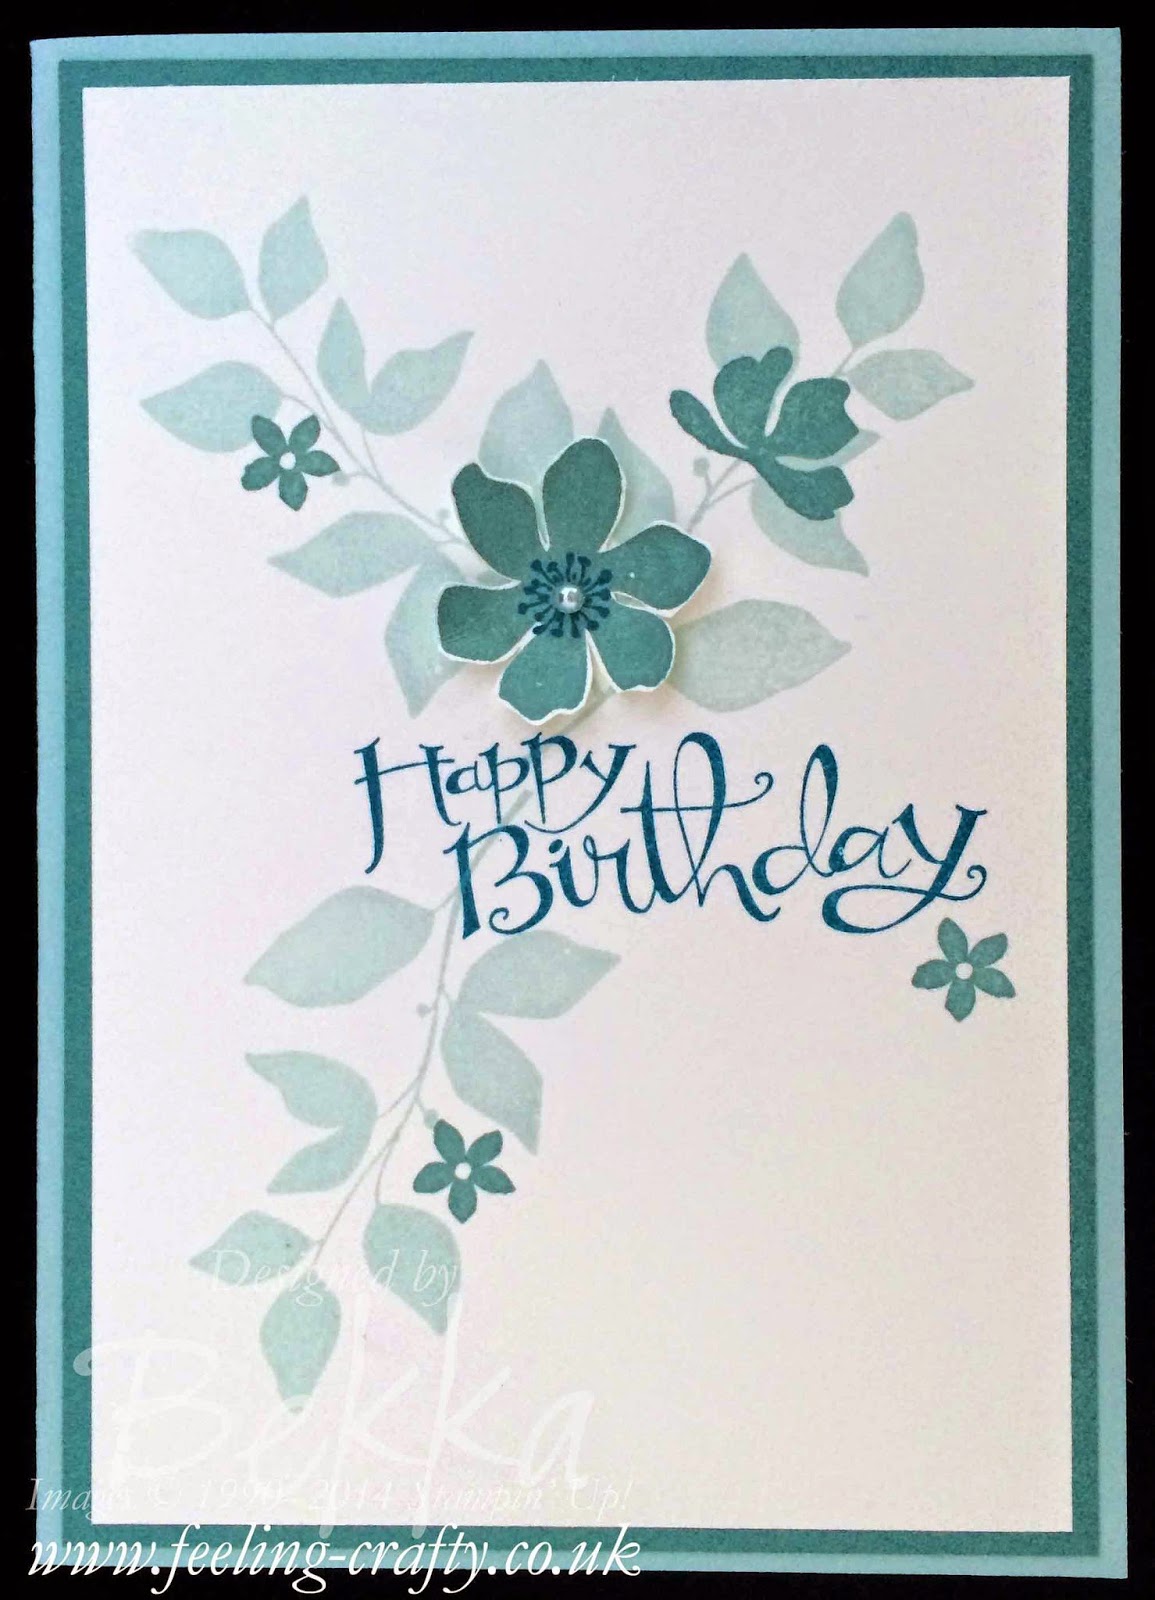 Stylish Blue Birthday Card using Summer Silhouettes from Stampin' Up!